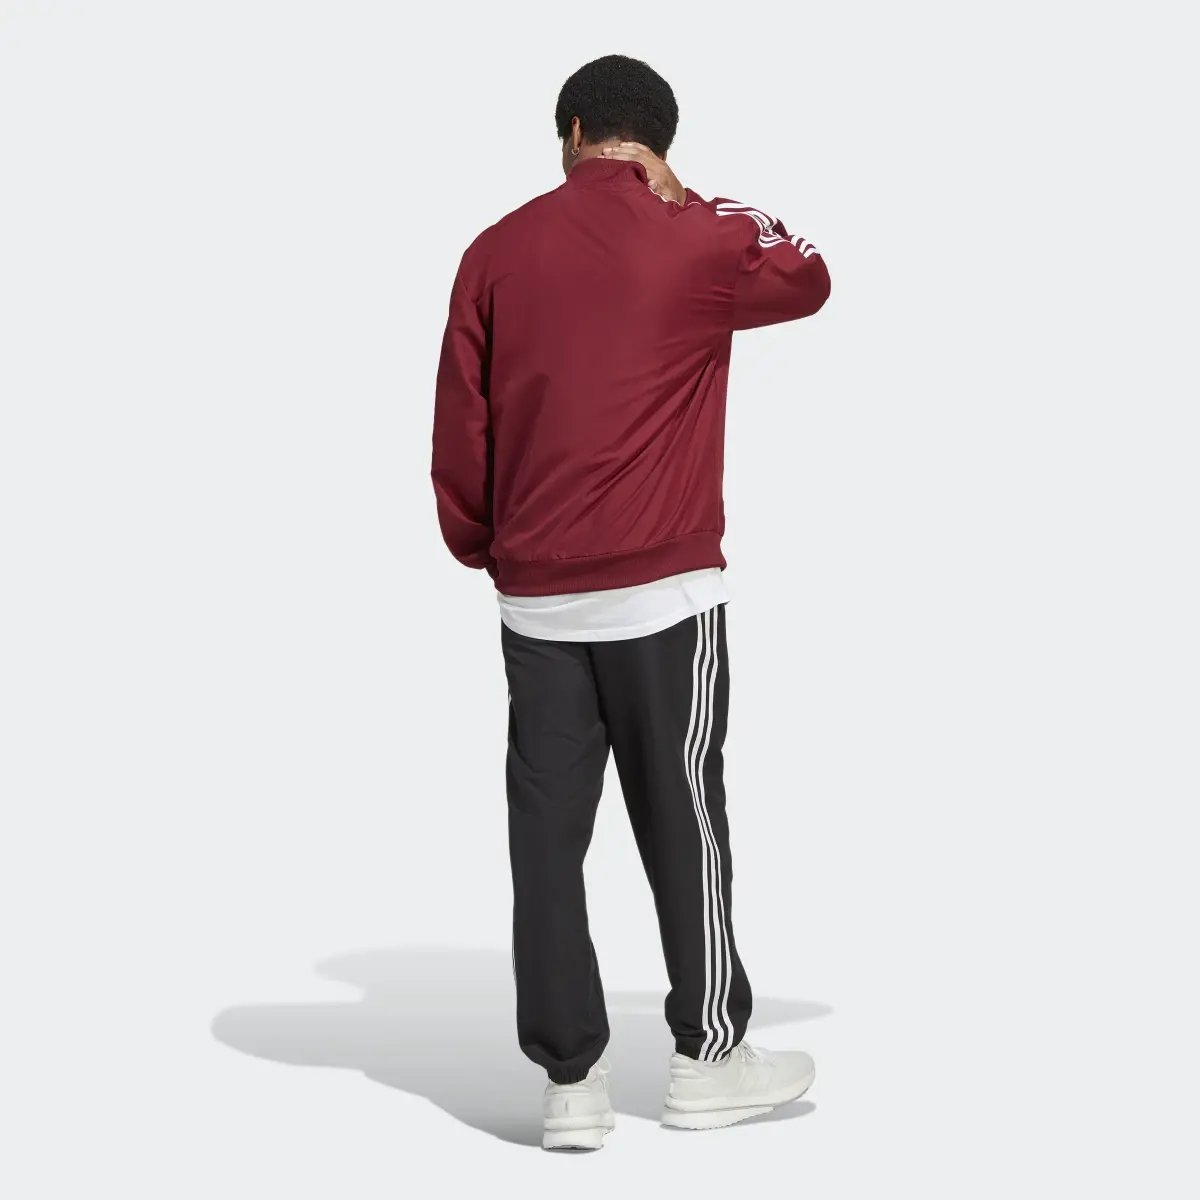 Adidas 3-Stripes Woven Track Suit. 3